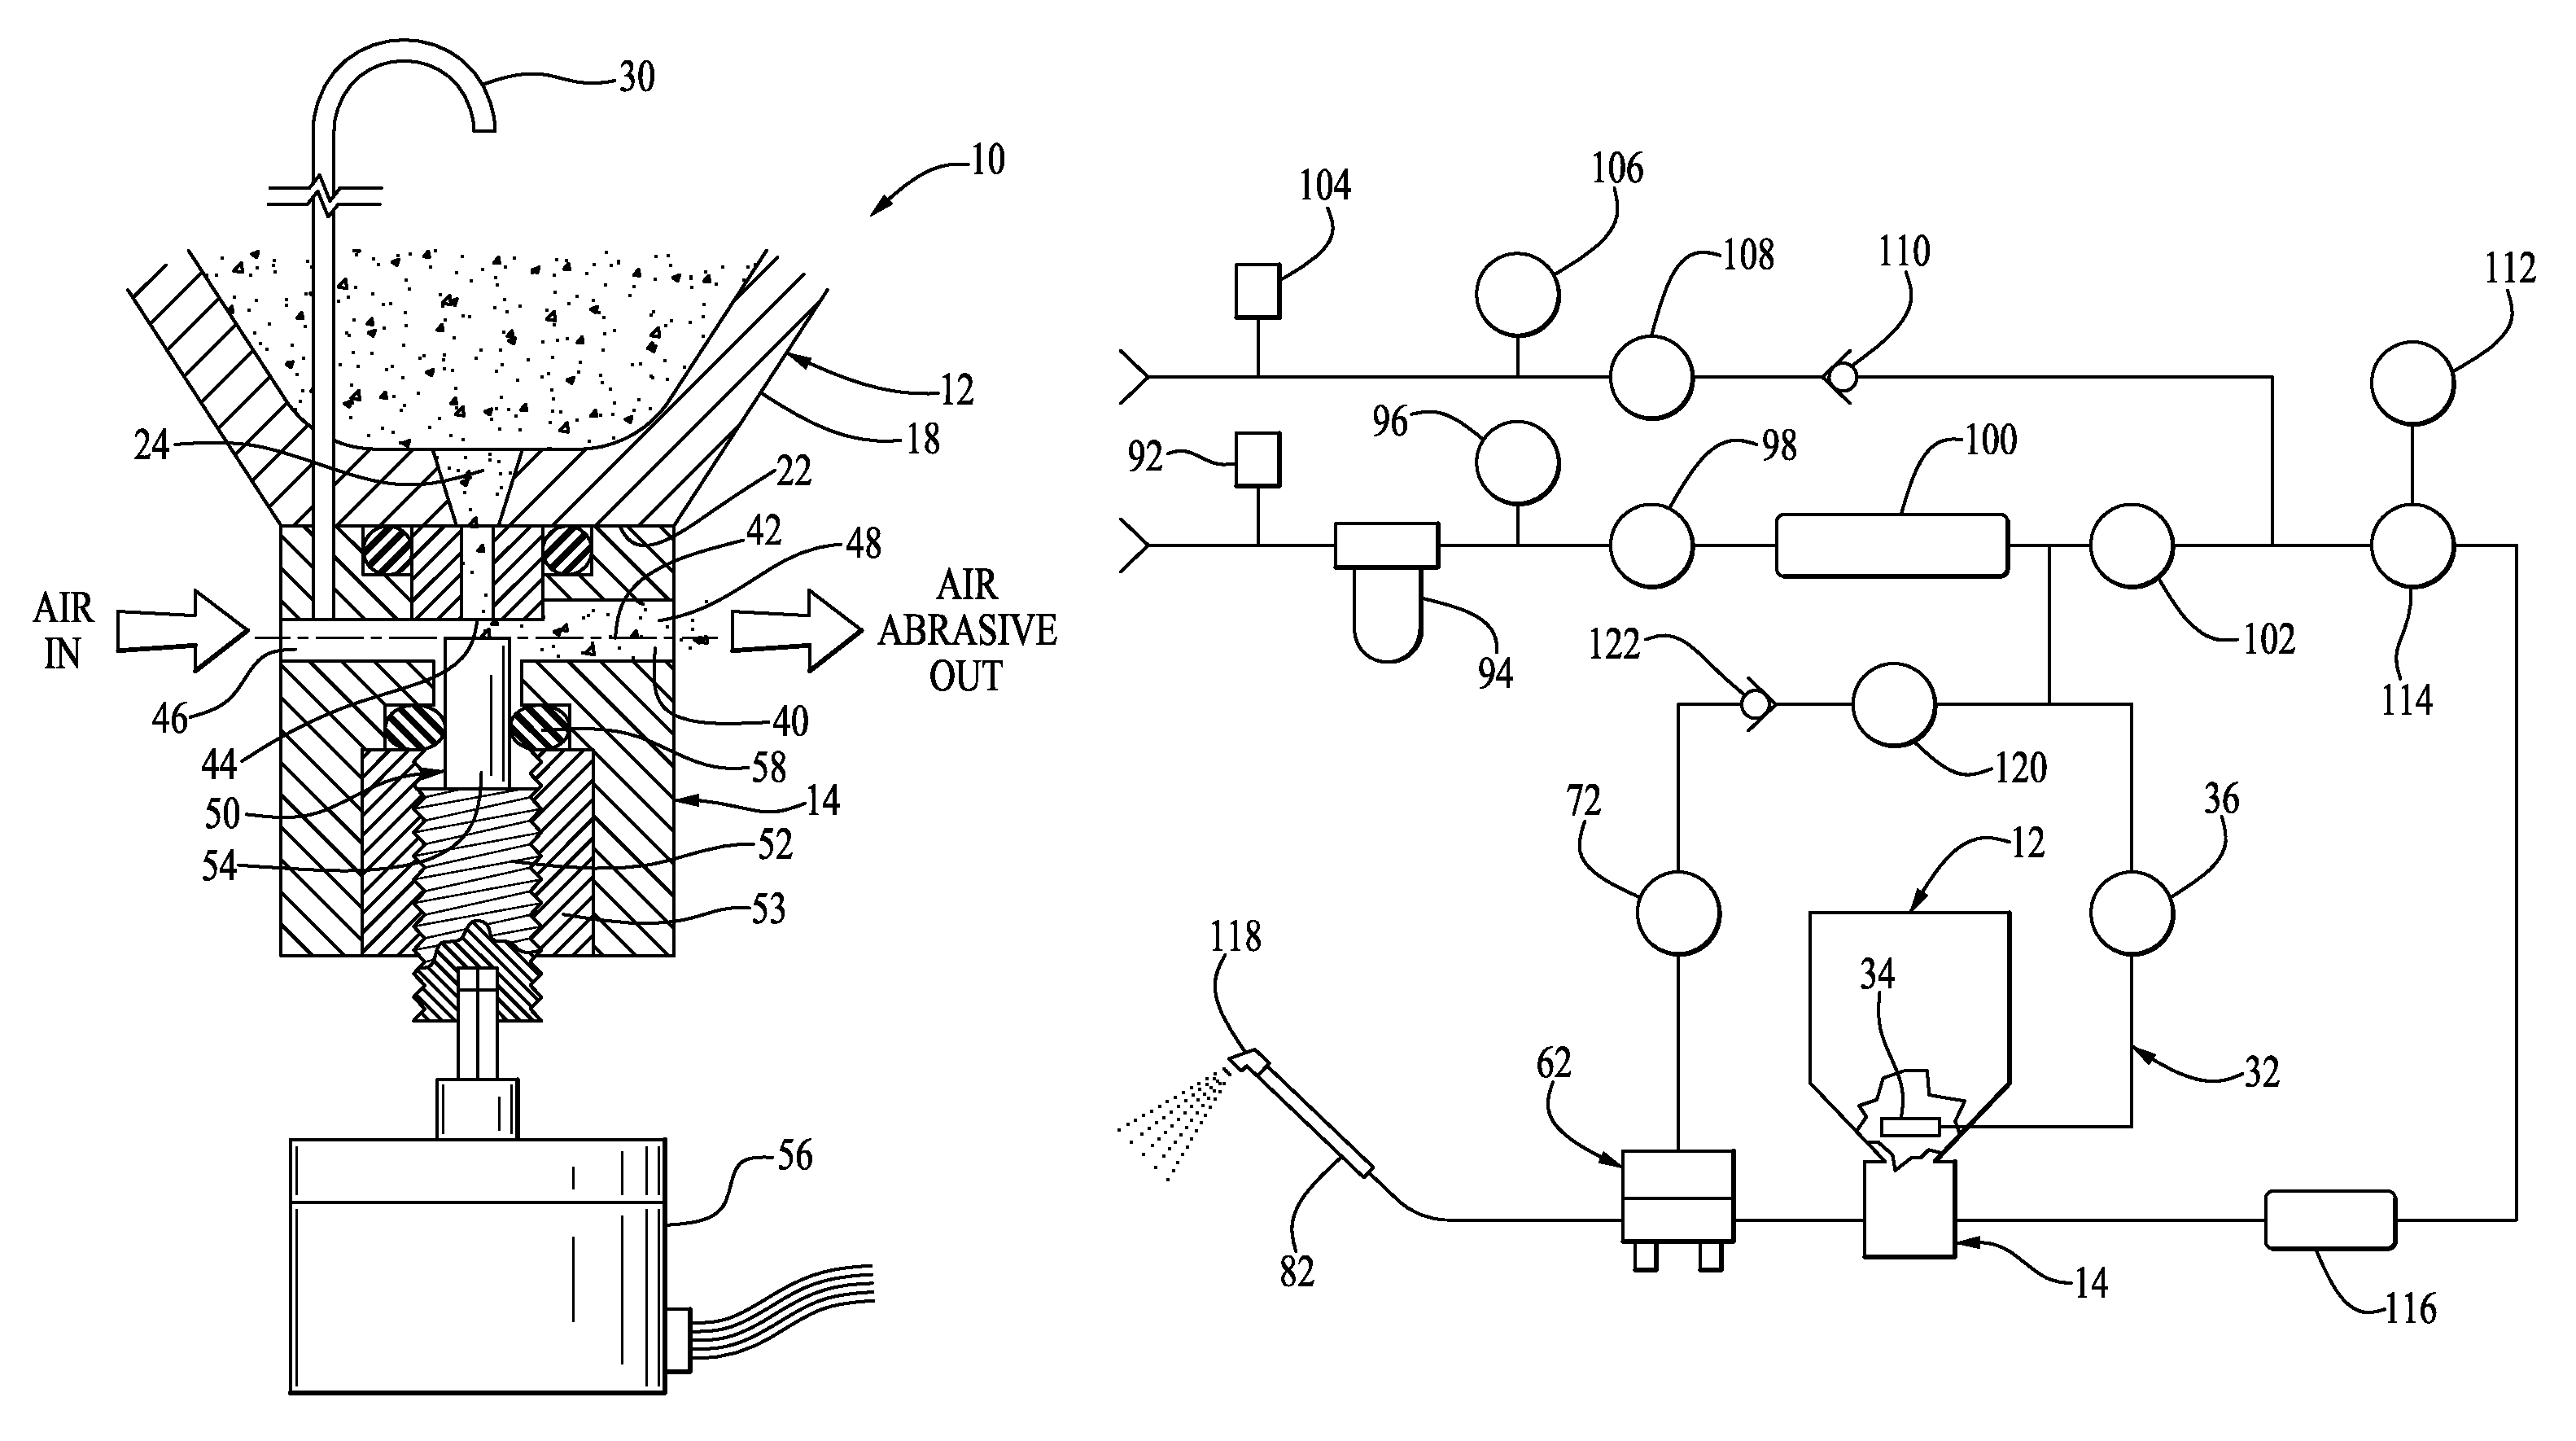 Fluidized particle abrasion device with precision control